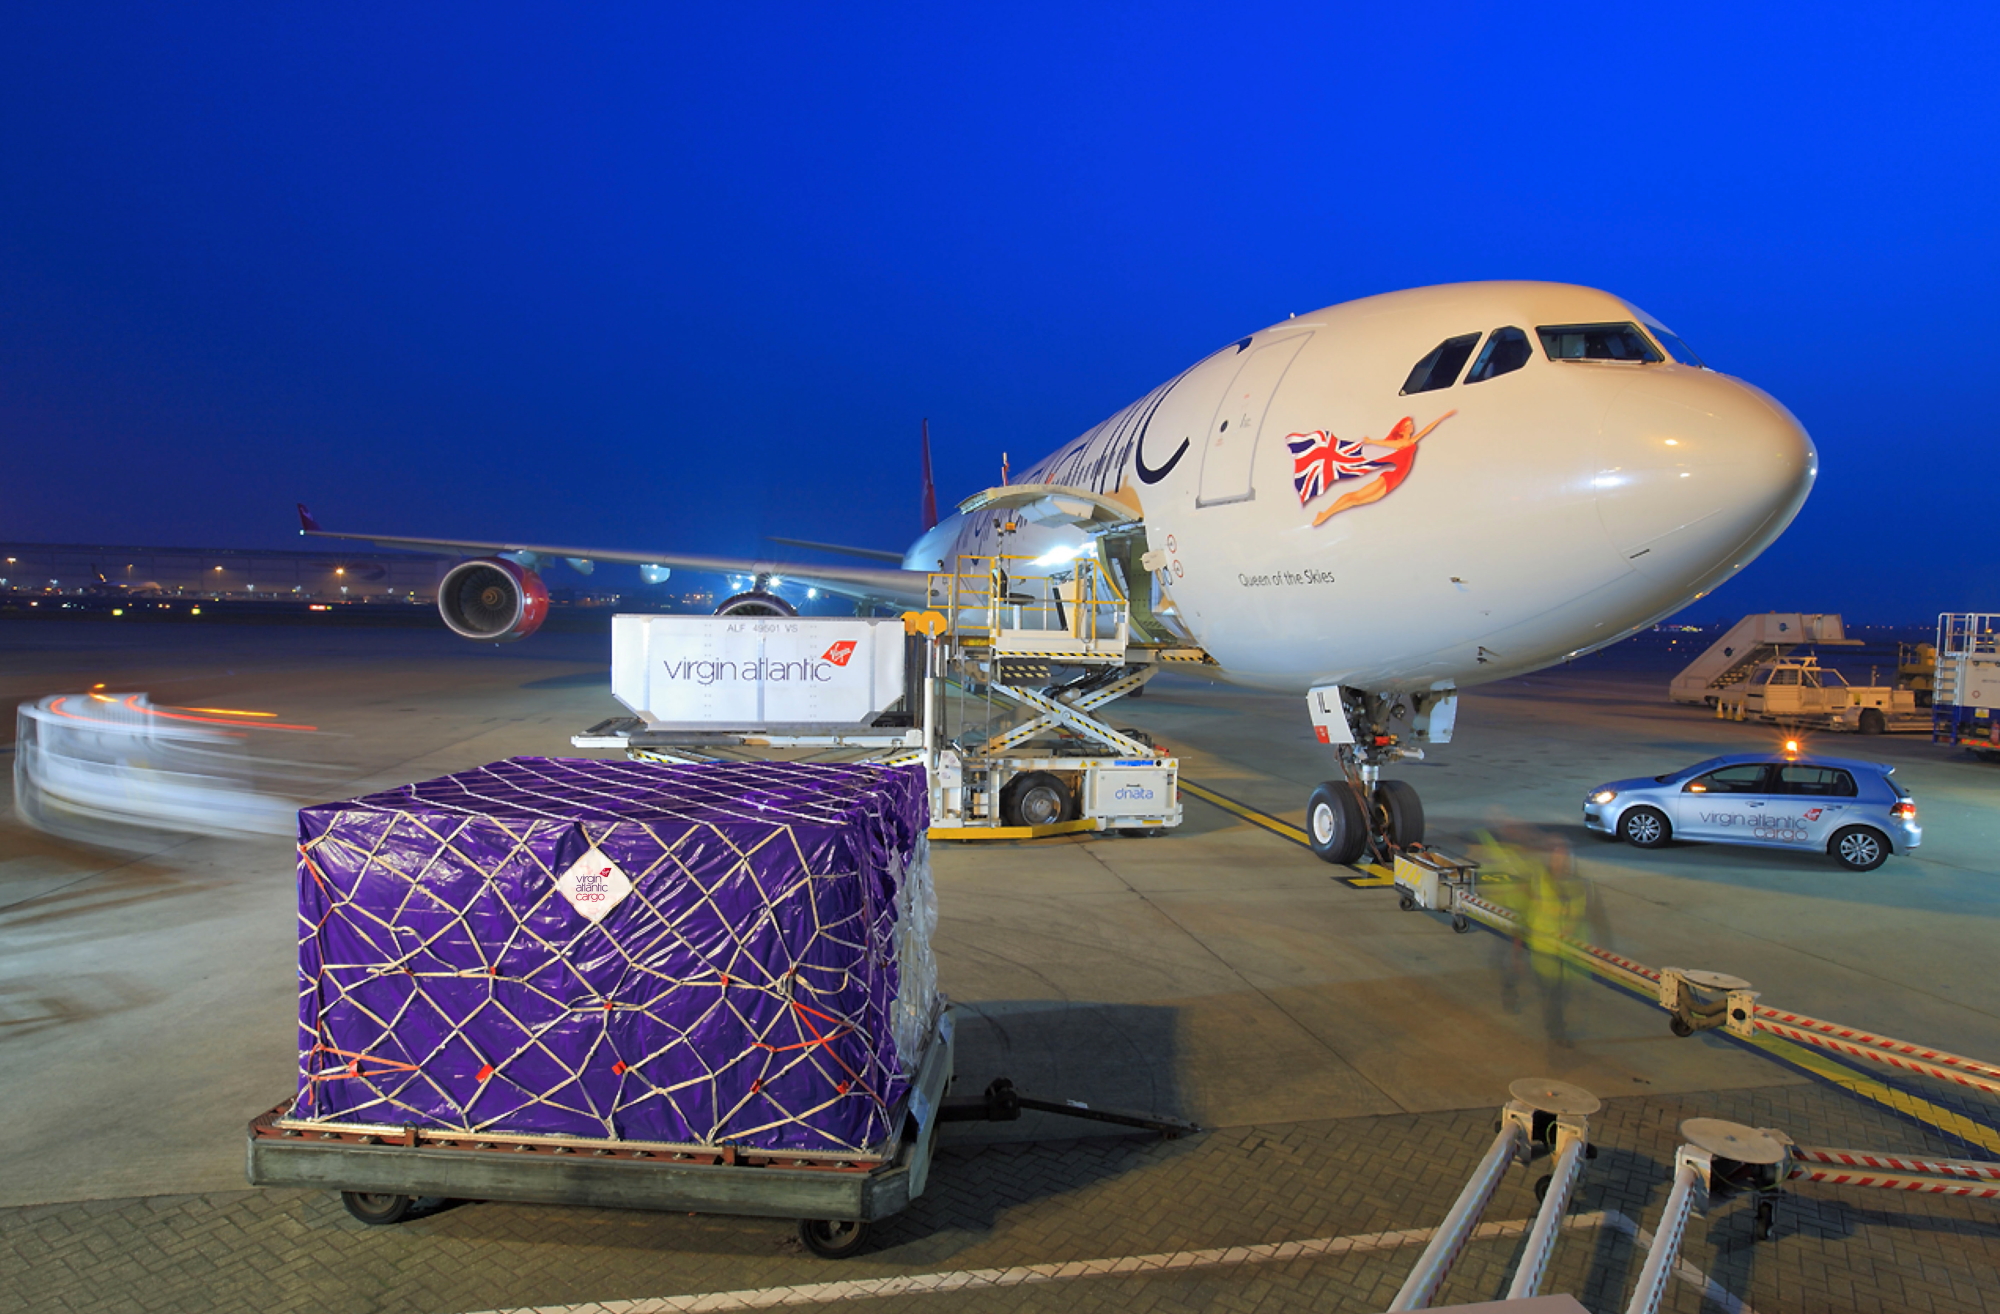 Virgin Atlantic Cargo has unveiled plans to launch flights between London Heathrow and São Paulo, Brazil in 2020. Flying daily between London Heathrow and São Paulo Guarulhos International Airport, the Boeing 787 service will offer cargo customers multiple tonnes of capacity a day. Click to enlarge.